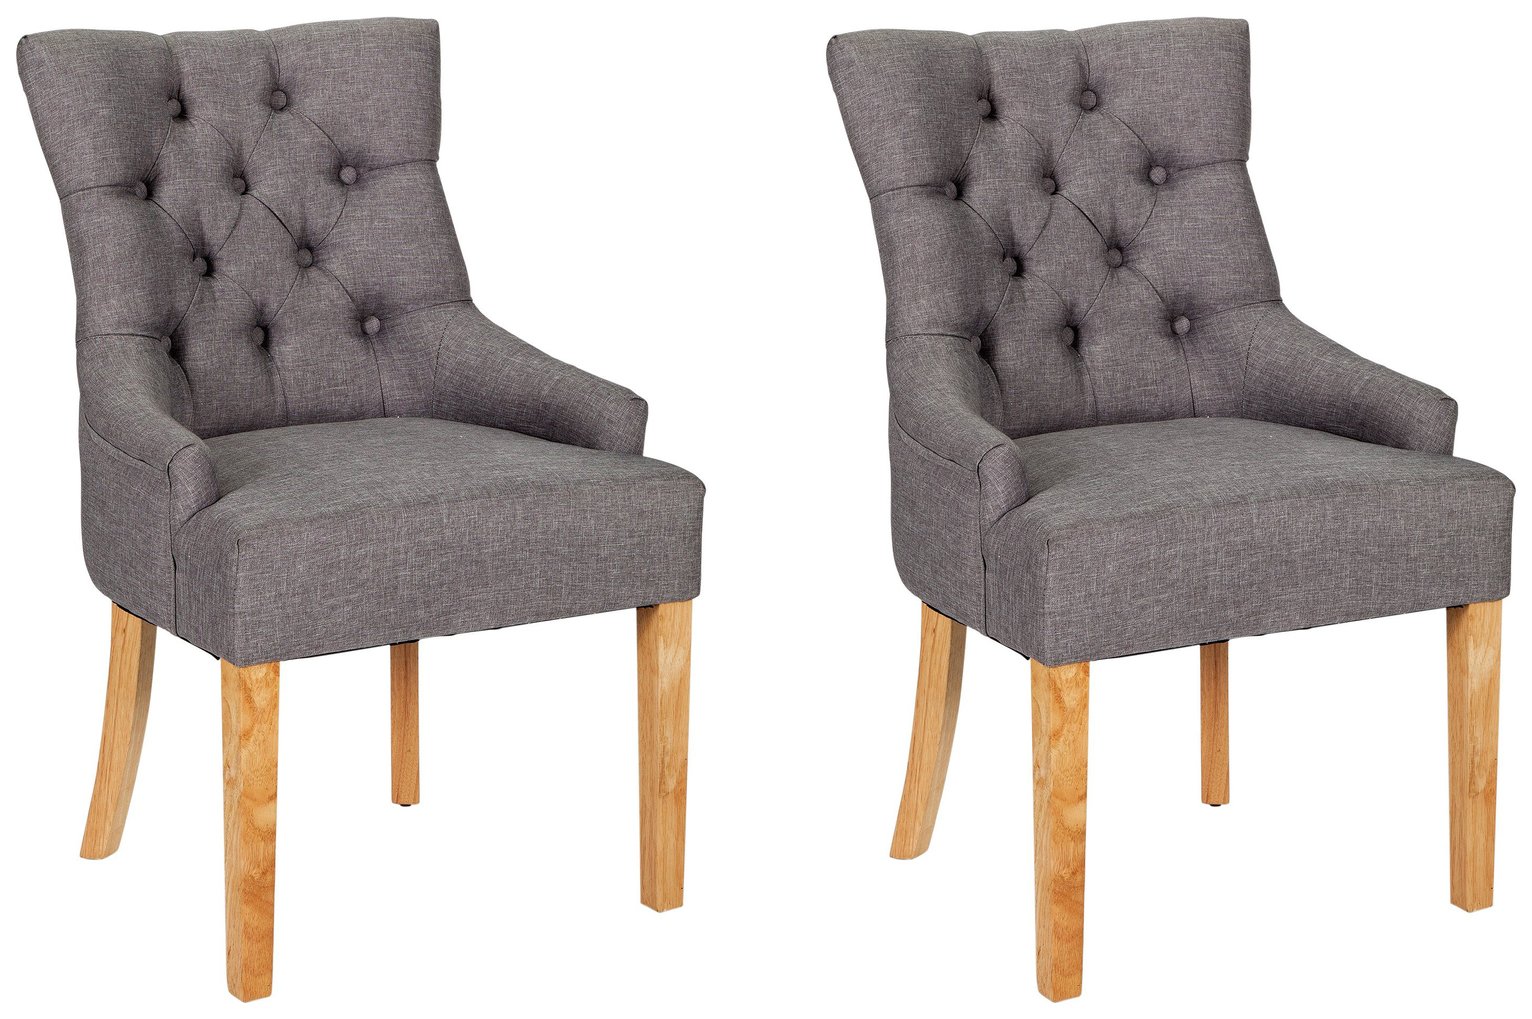 Argos Home Pair of Cherwell Dining Chairs - Charcoal